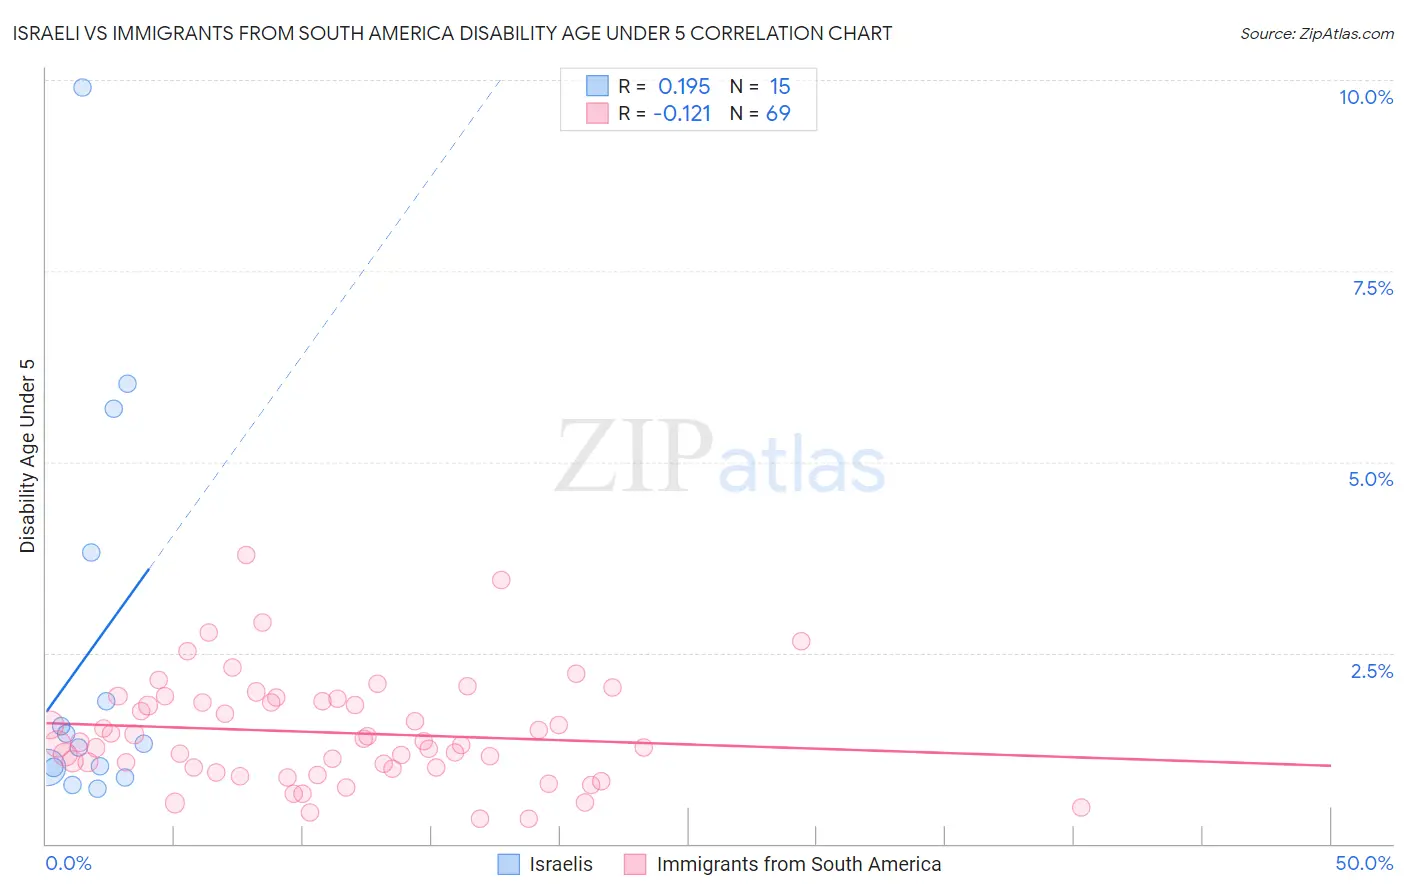 Israeli vs Immigrants from South America Disability Age Under 5